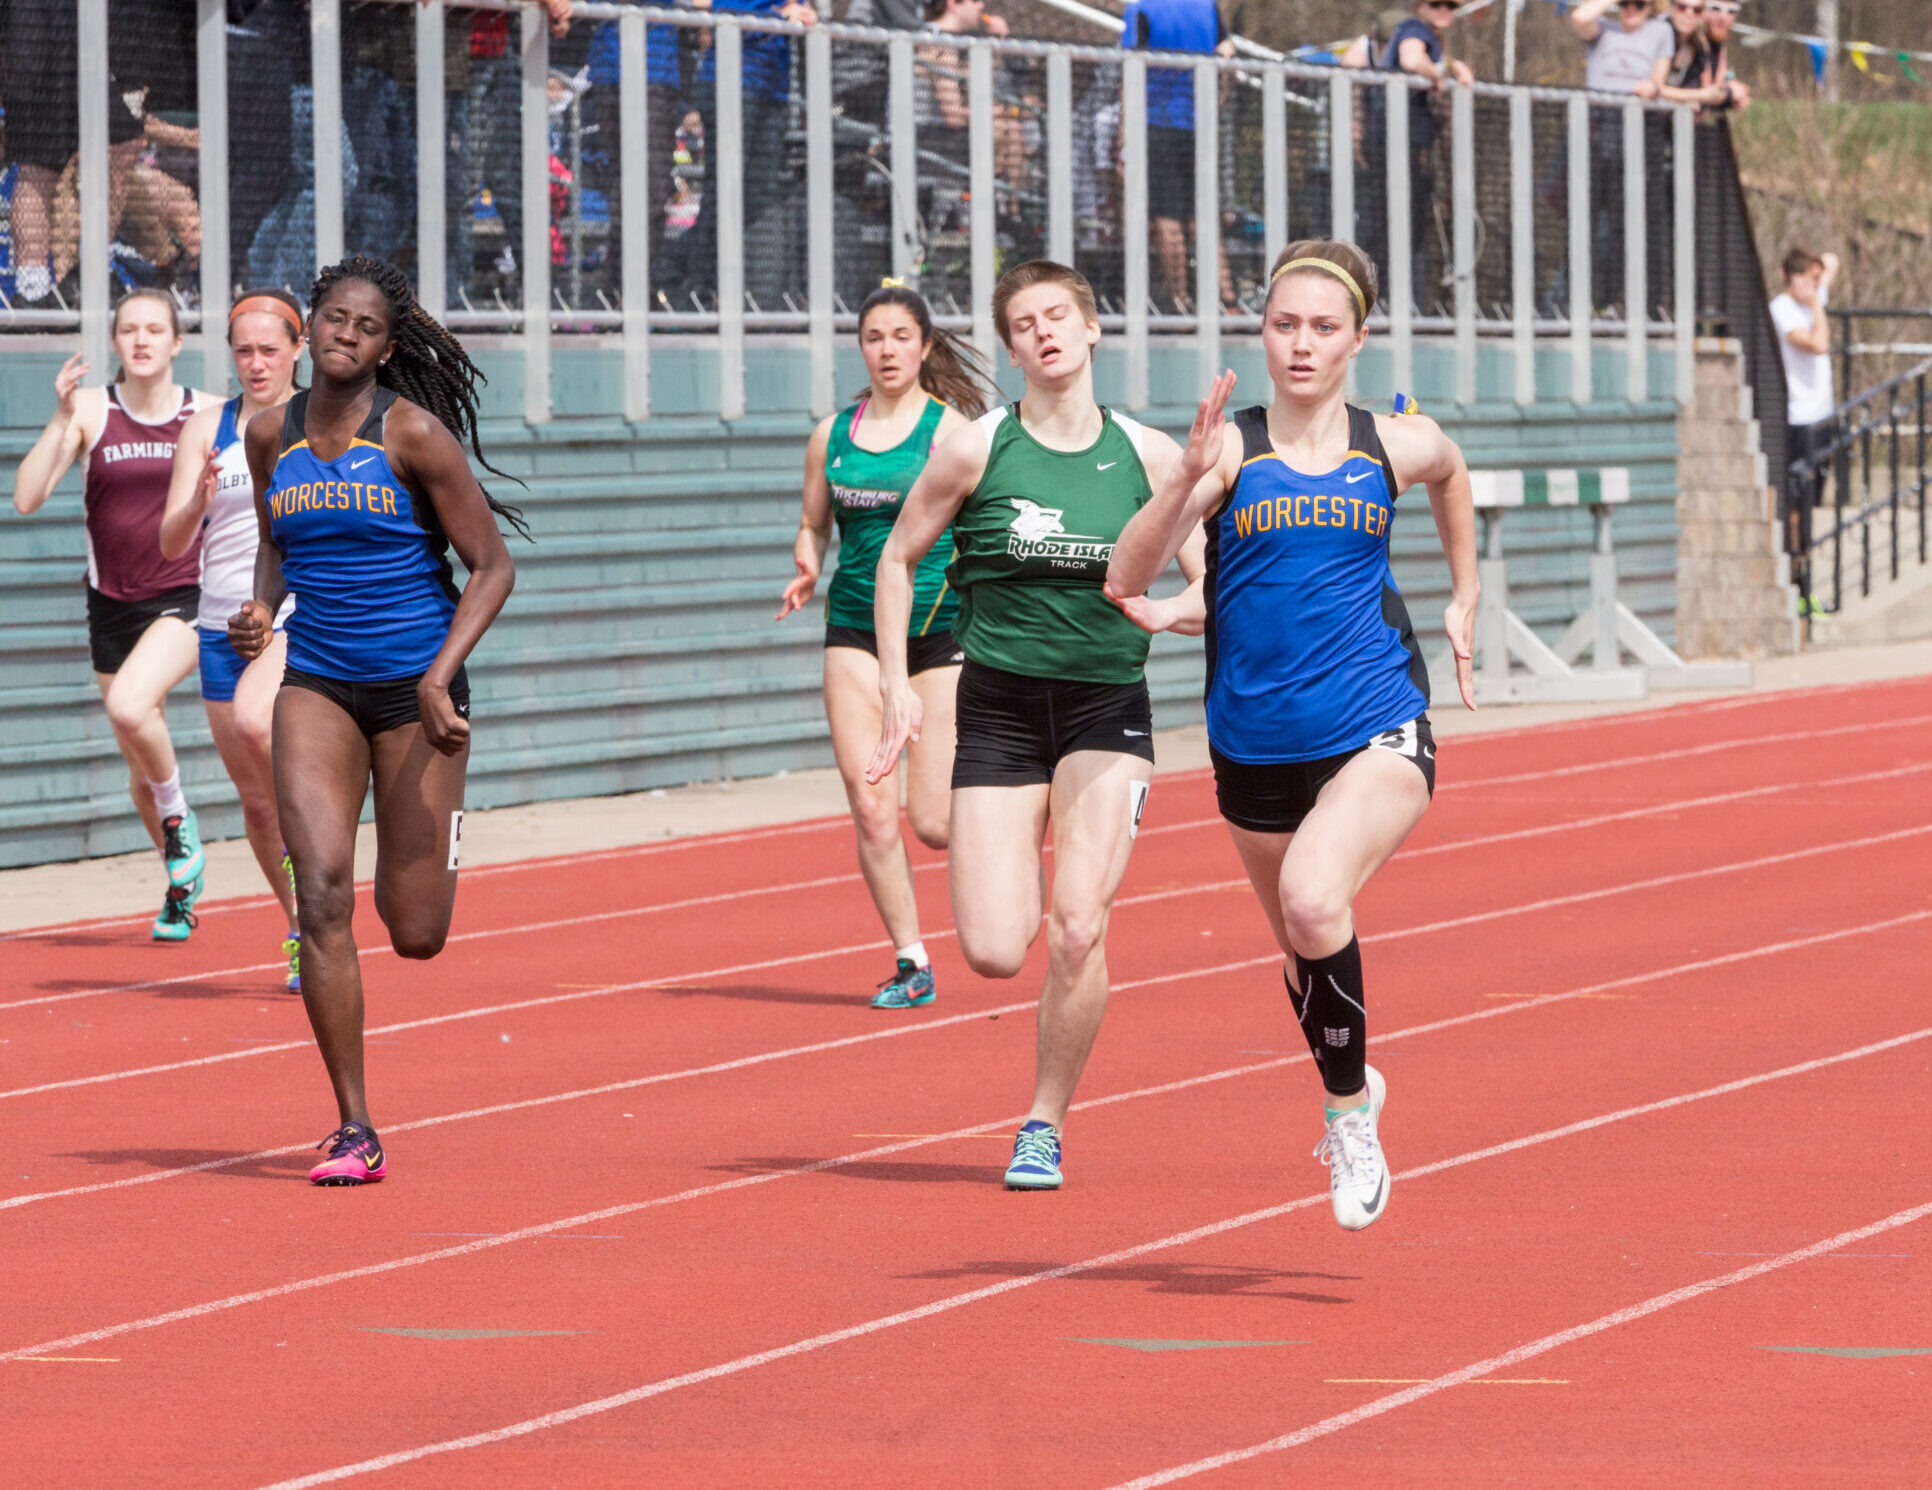 A Worcester State track athlete running in a race